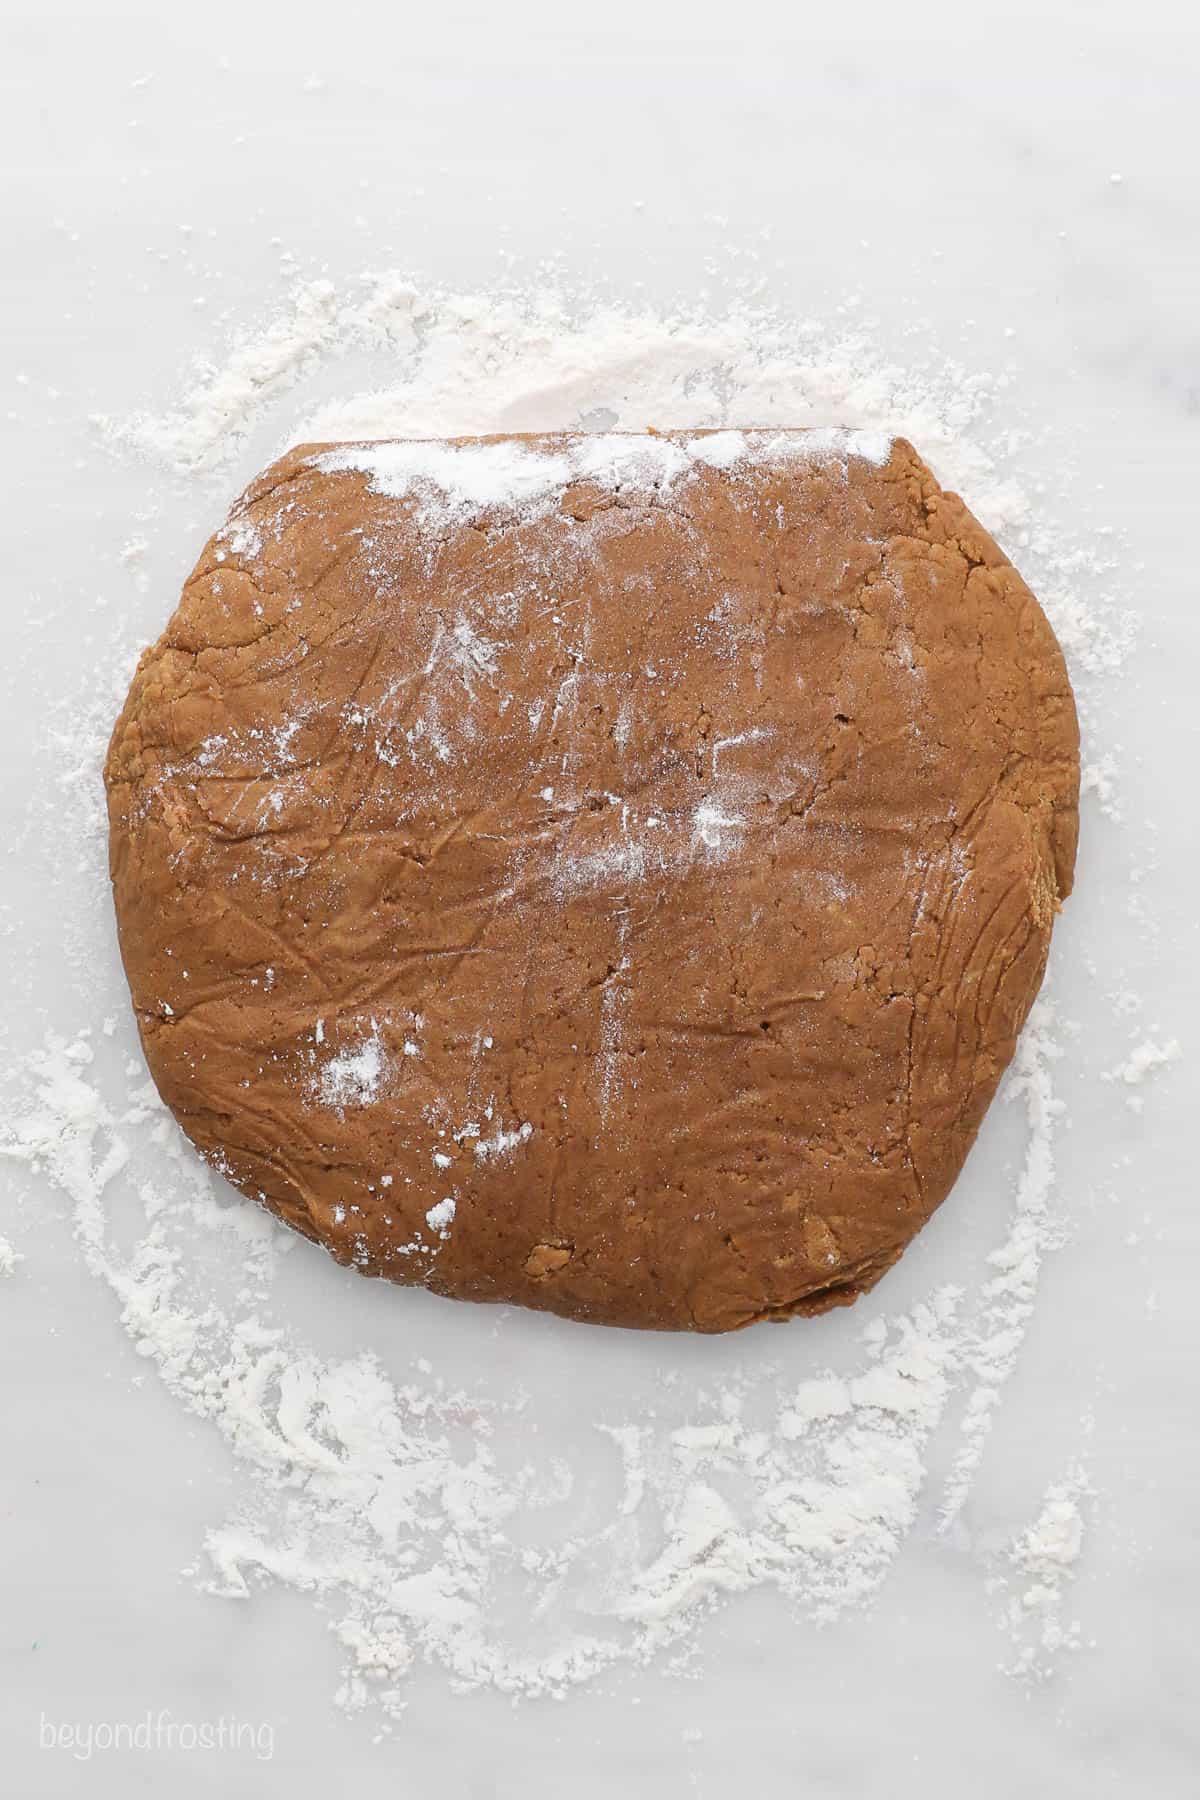 A disc of chilled gingerbread cookie dough on a countertop covered in flour